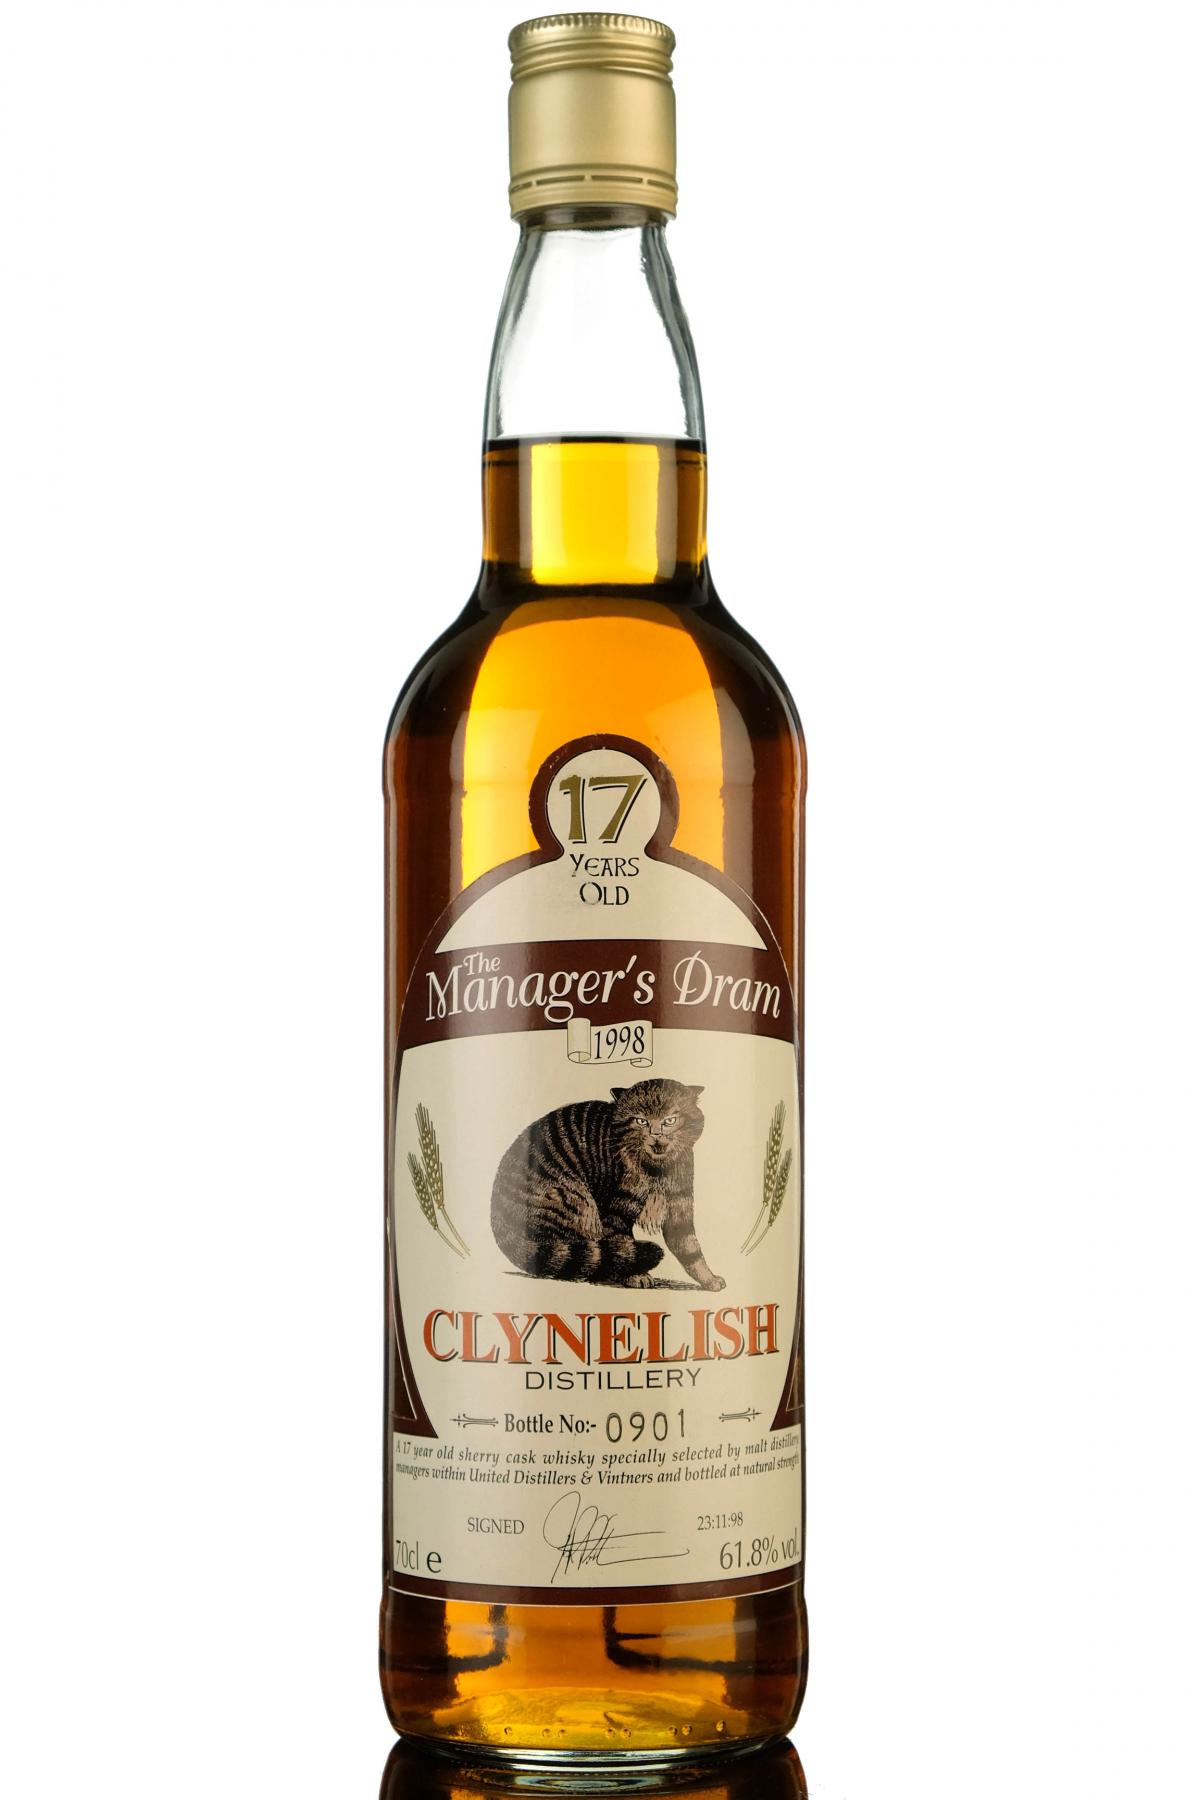 Clynelish 17 Year Old - Managers Dram 1998